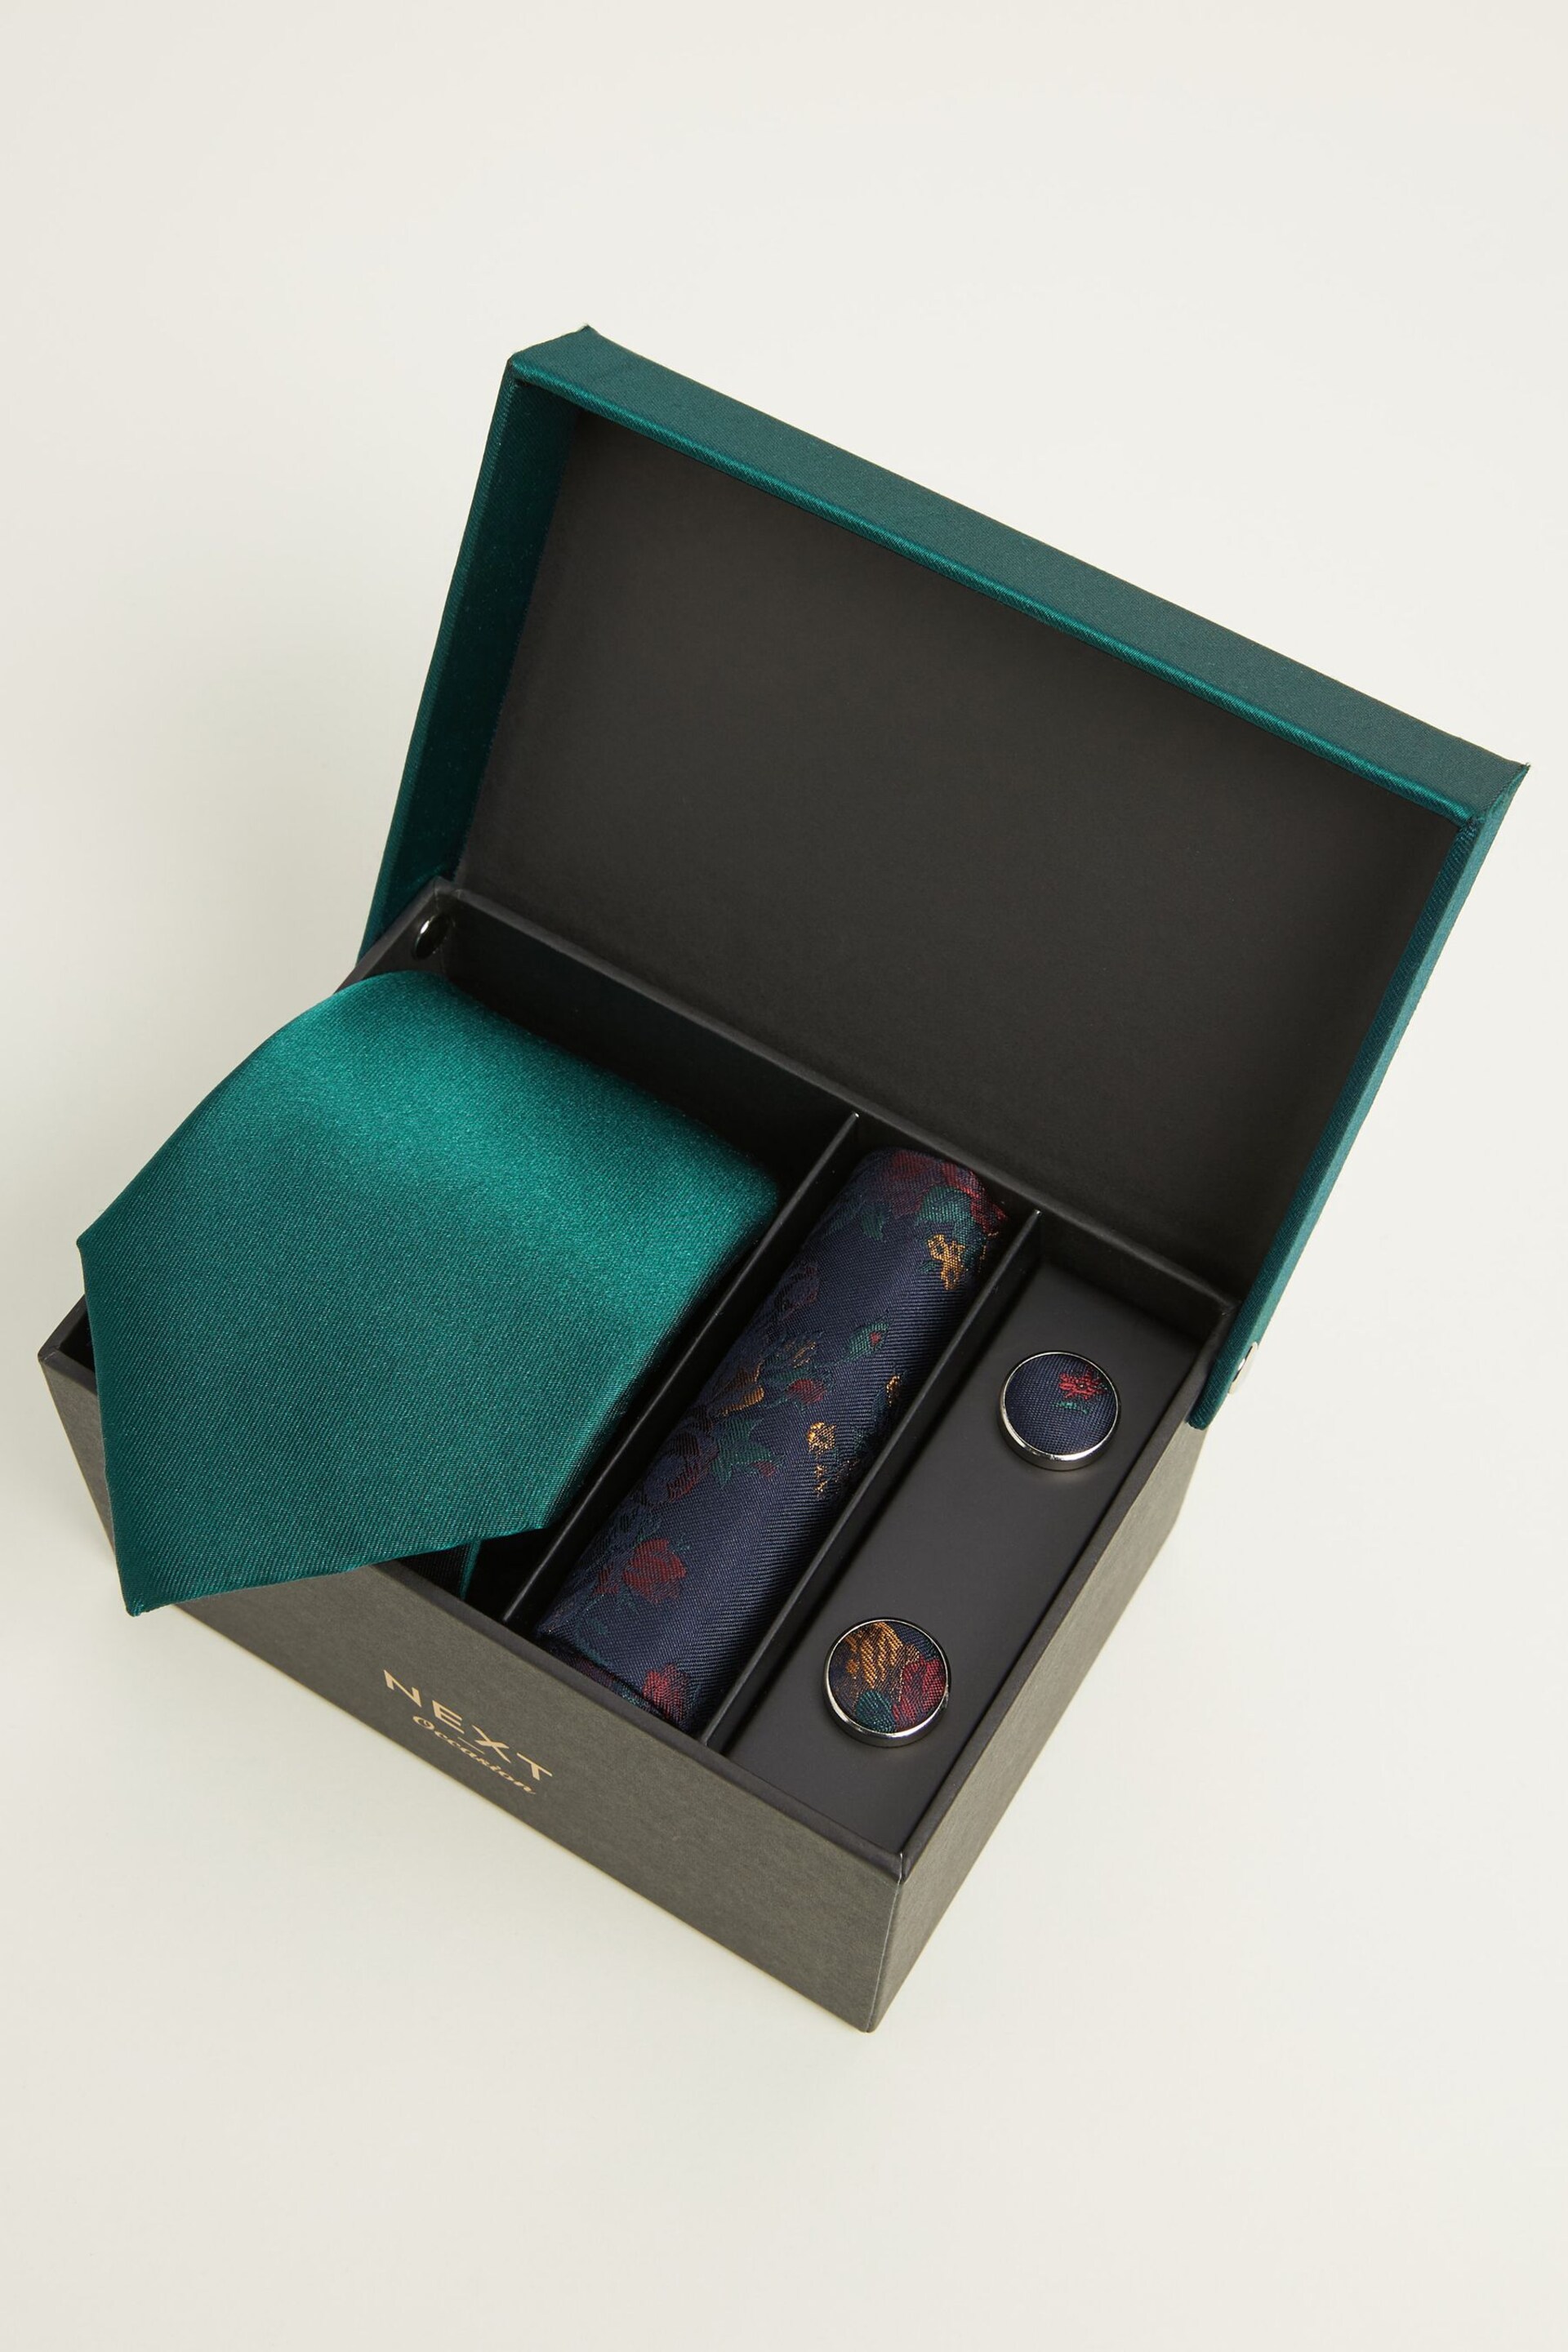 Forest Green Tie, Pocket Square and Cufflinks Gift Box Set - Image 1 of 4